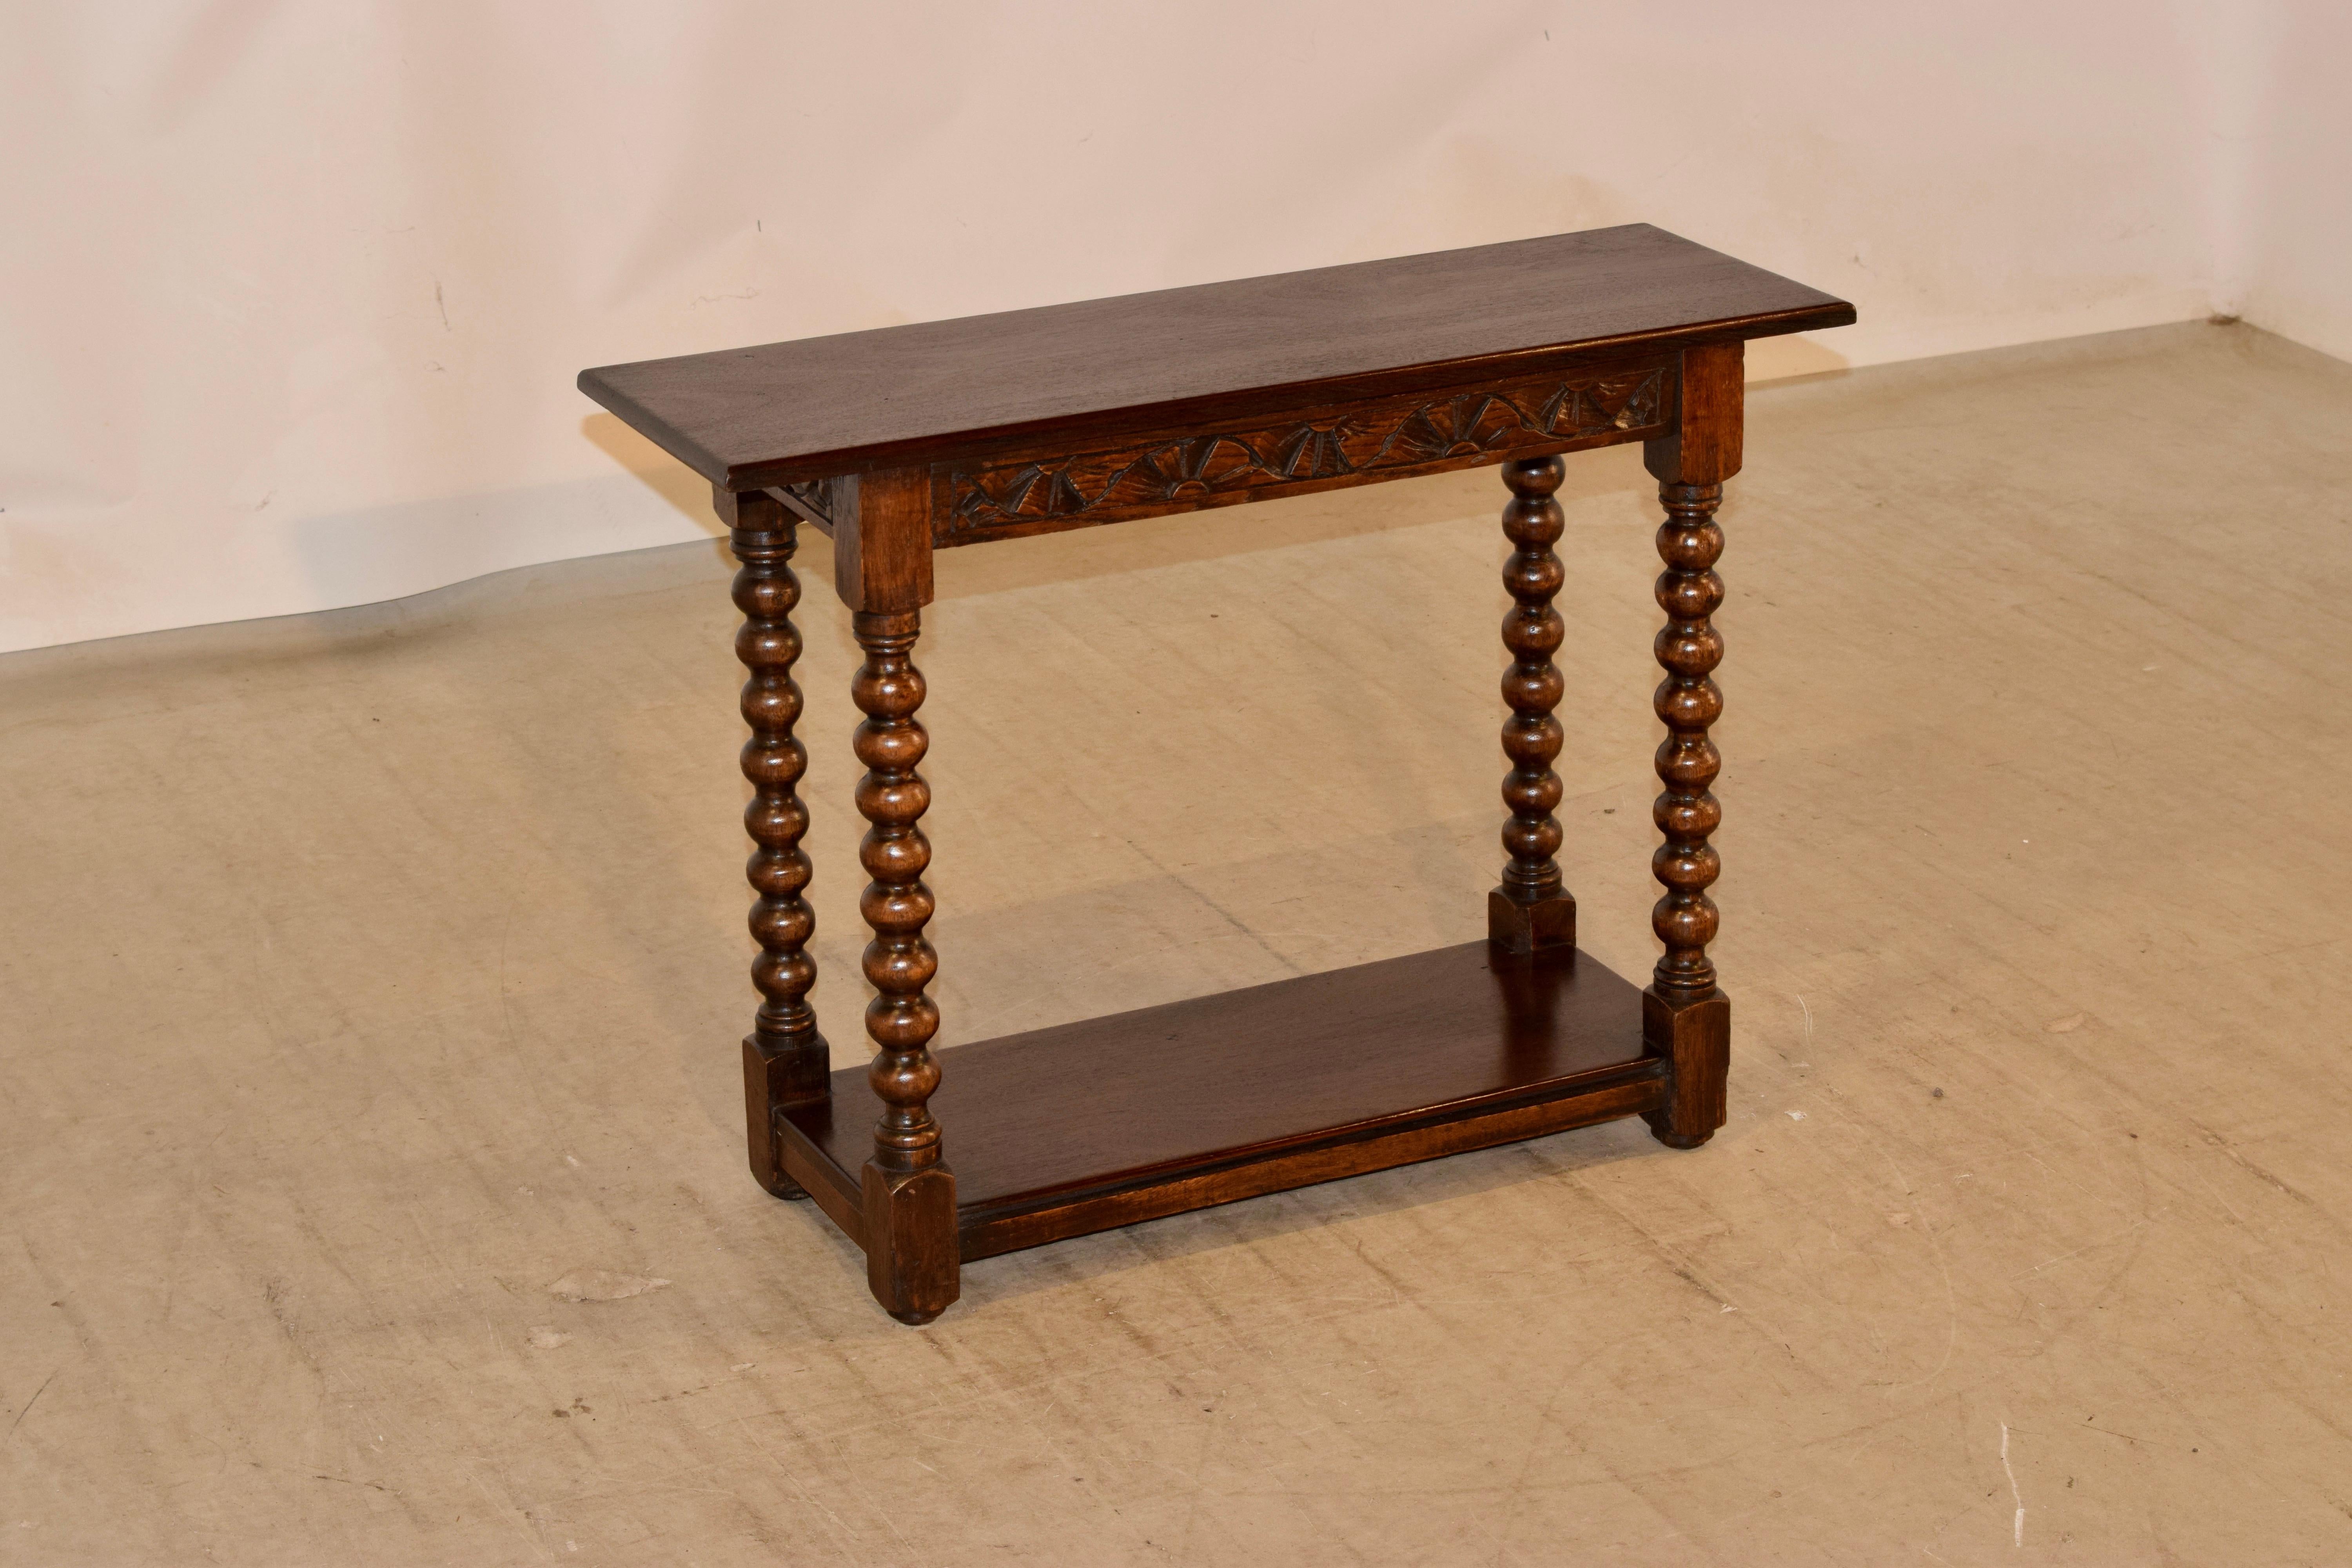 19th century slender bench from England made from oak and mahogany. The top and lower shelves are made from single mahogany planks and are a wonderfully grained contrast to the oak frame. The mahogany top follows down to a hand carved decorated